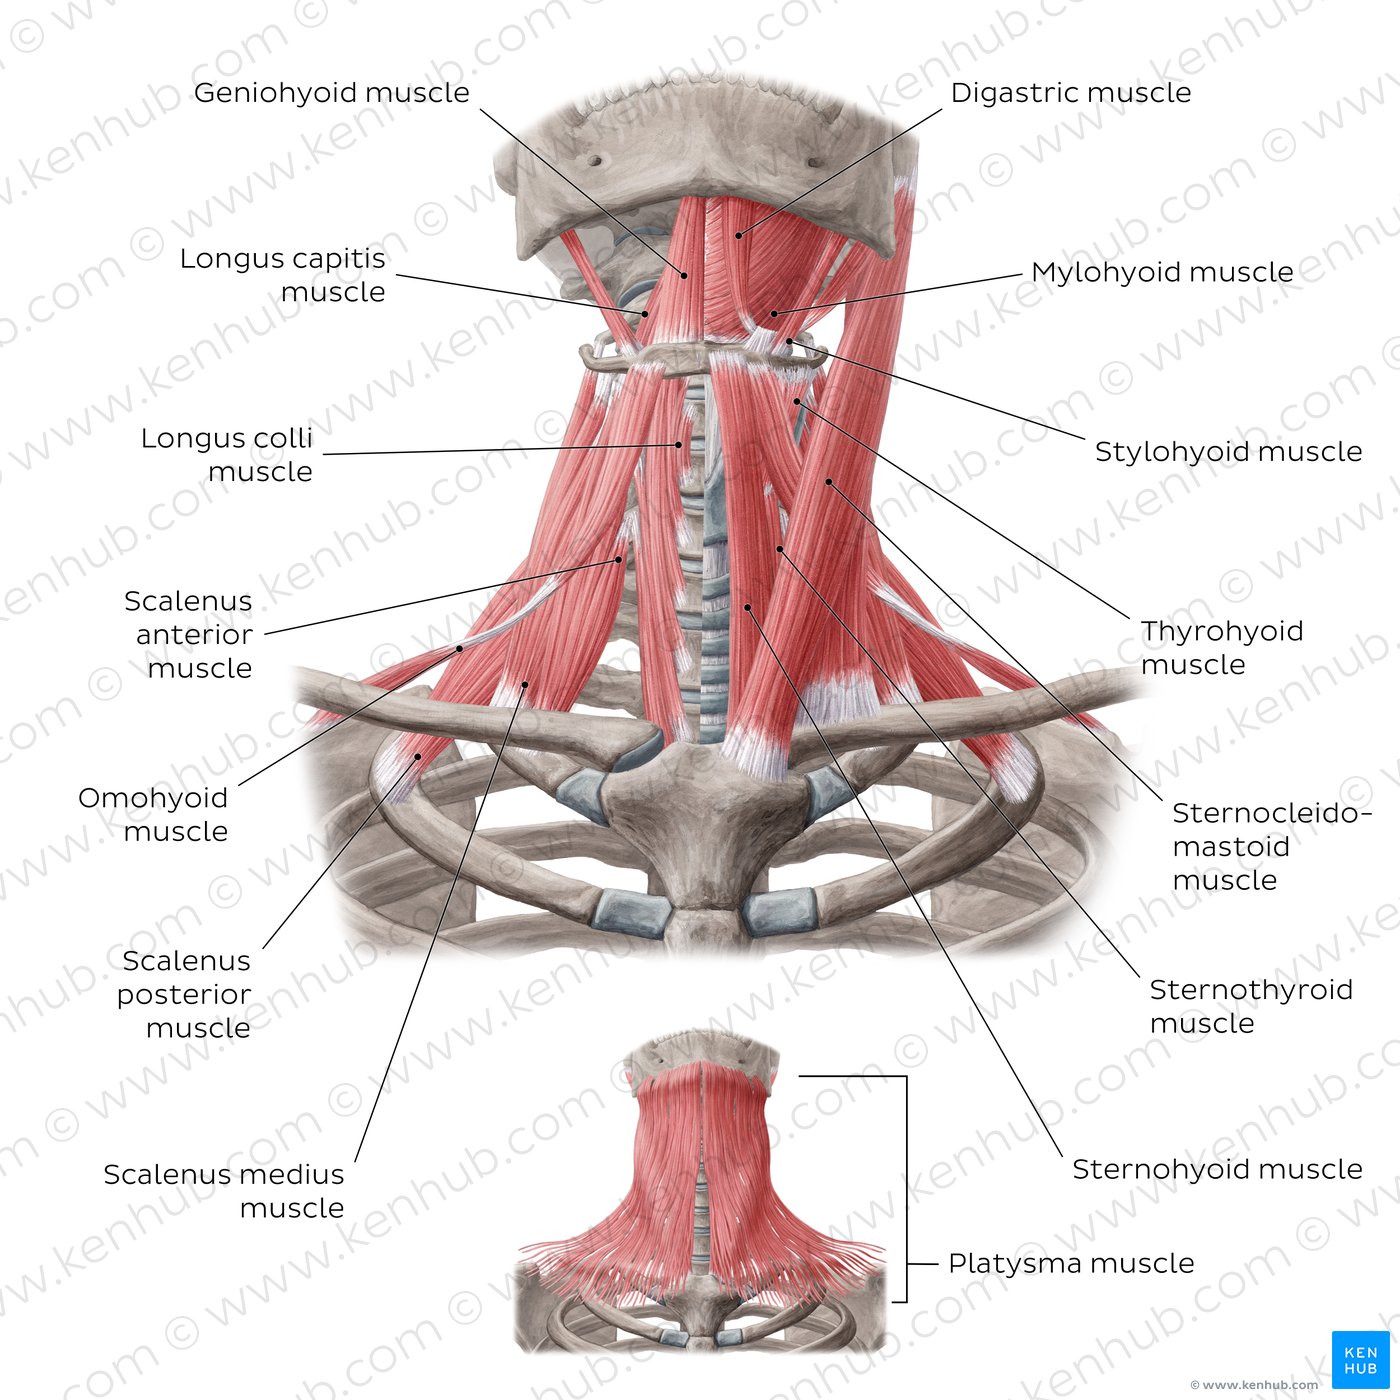 Muscles of the anterior neck